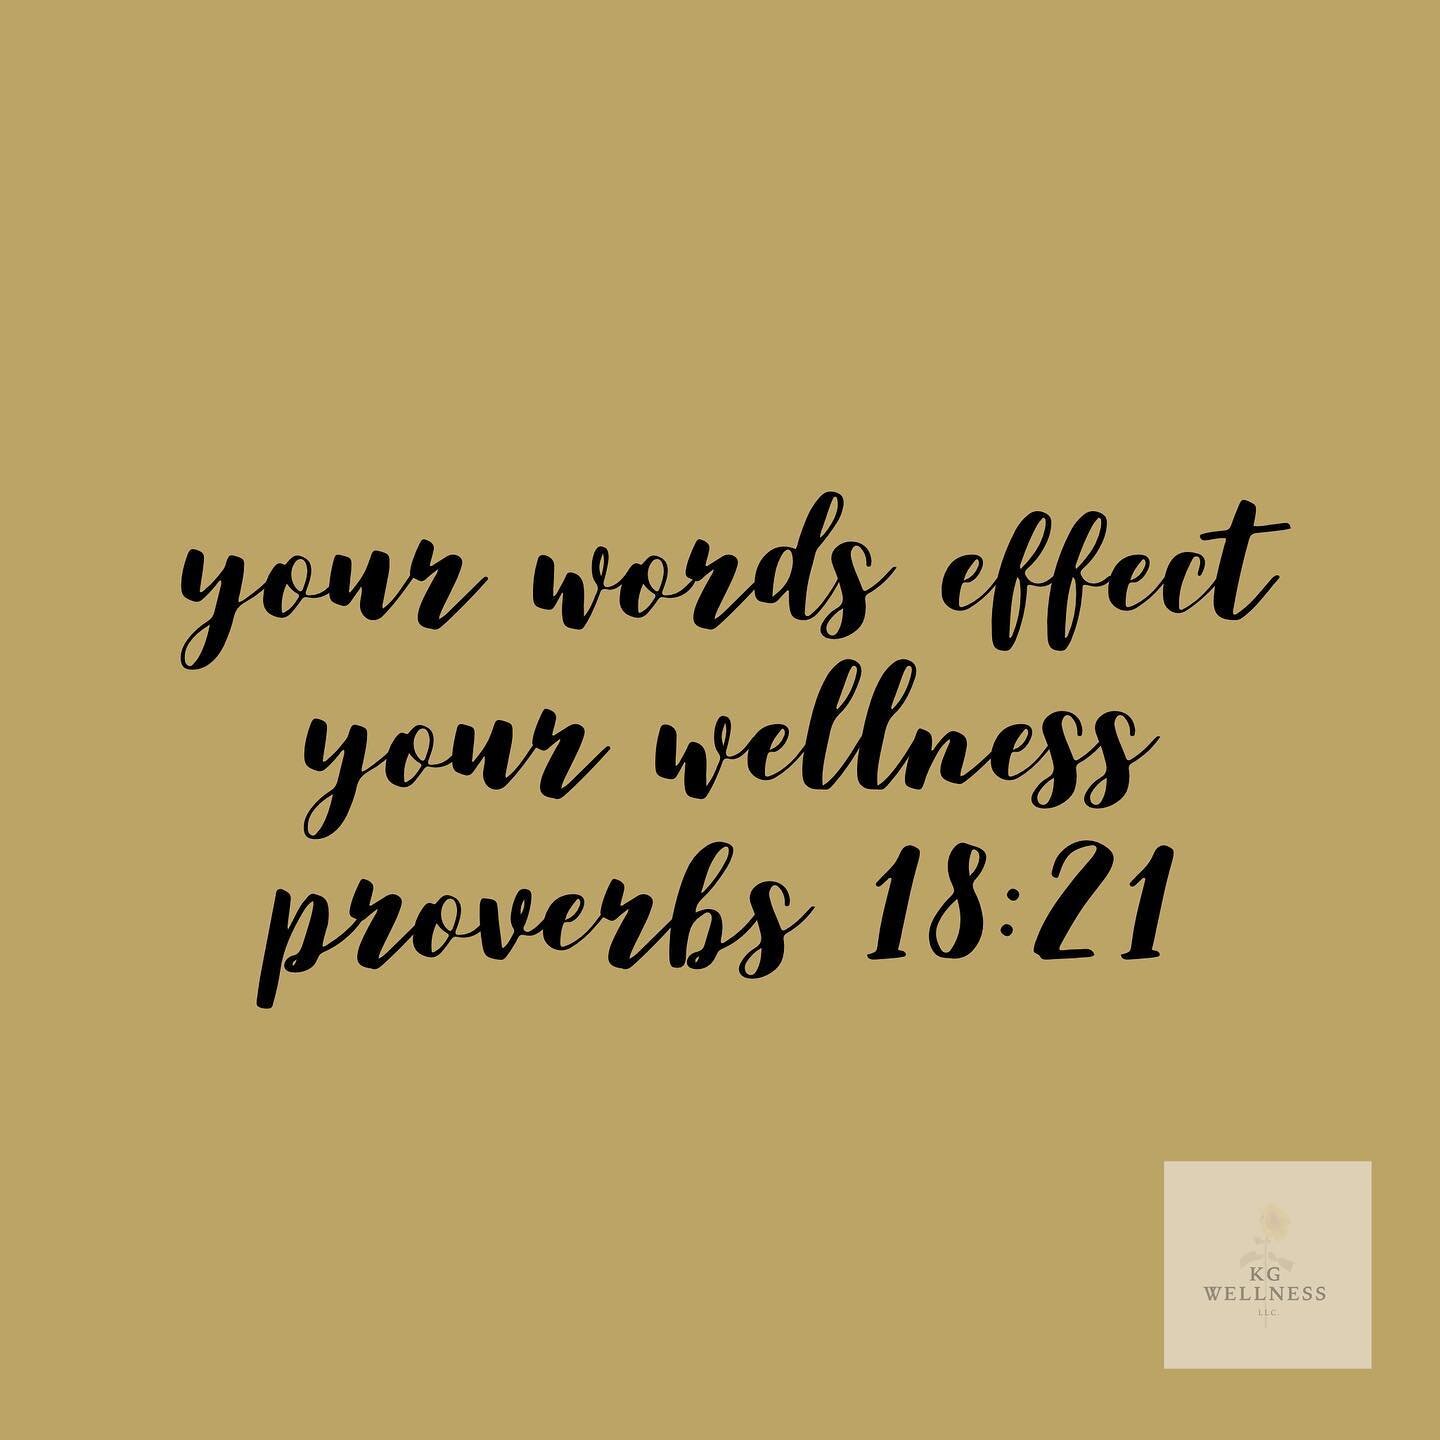 That&rsquo;s bible! But it&rsquo;s also life...let&rsquo;s intentionally change our words we speak this week. Not only the words we speak aloud but the ones we keep buried in our thoughts. You know that &ldquo;I&rsquo;m so dumb!&rdquo; or &ldquo;That